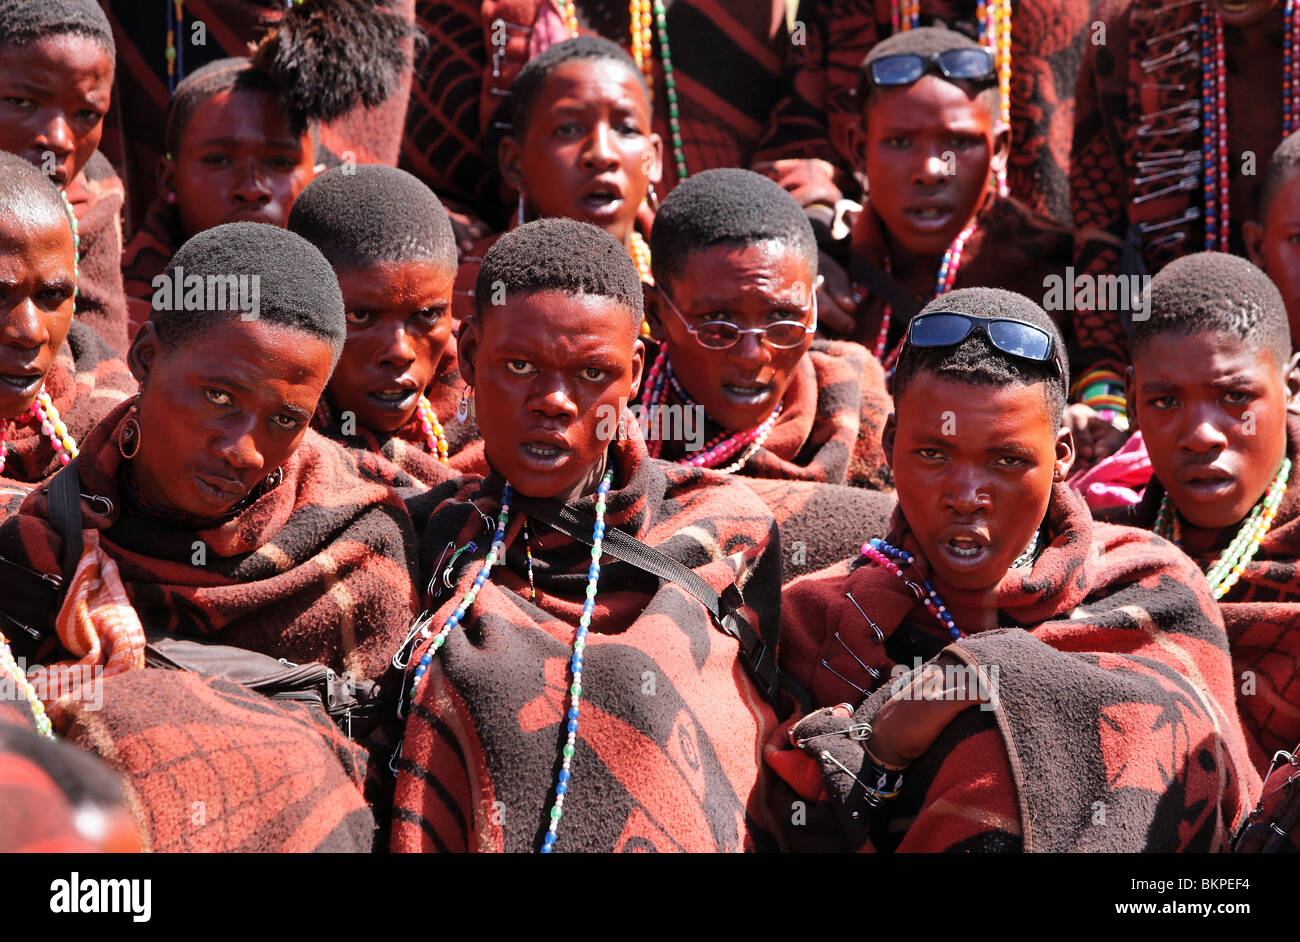 Lesotho: Redly made up young men celebrate an initiation celebration their admission into the world of adult men. Stock Photo